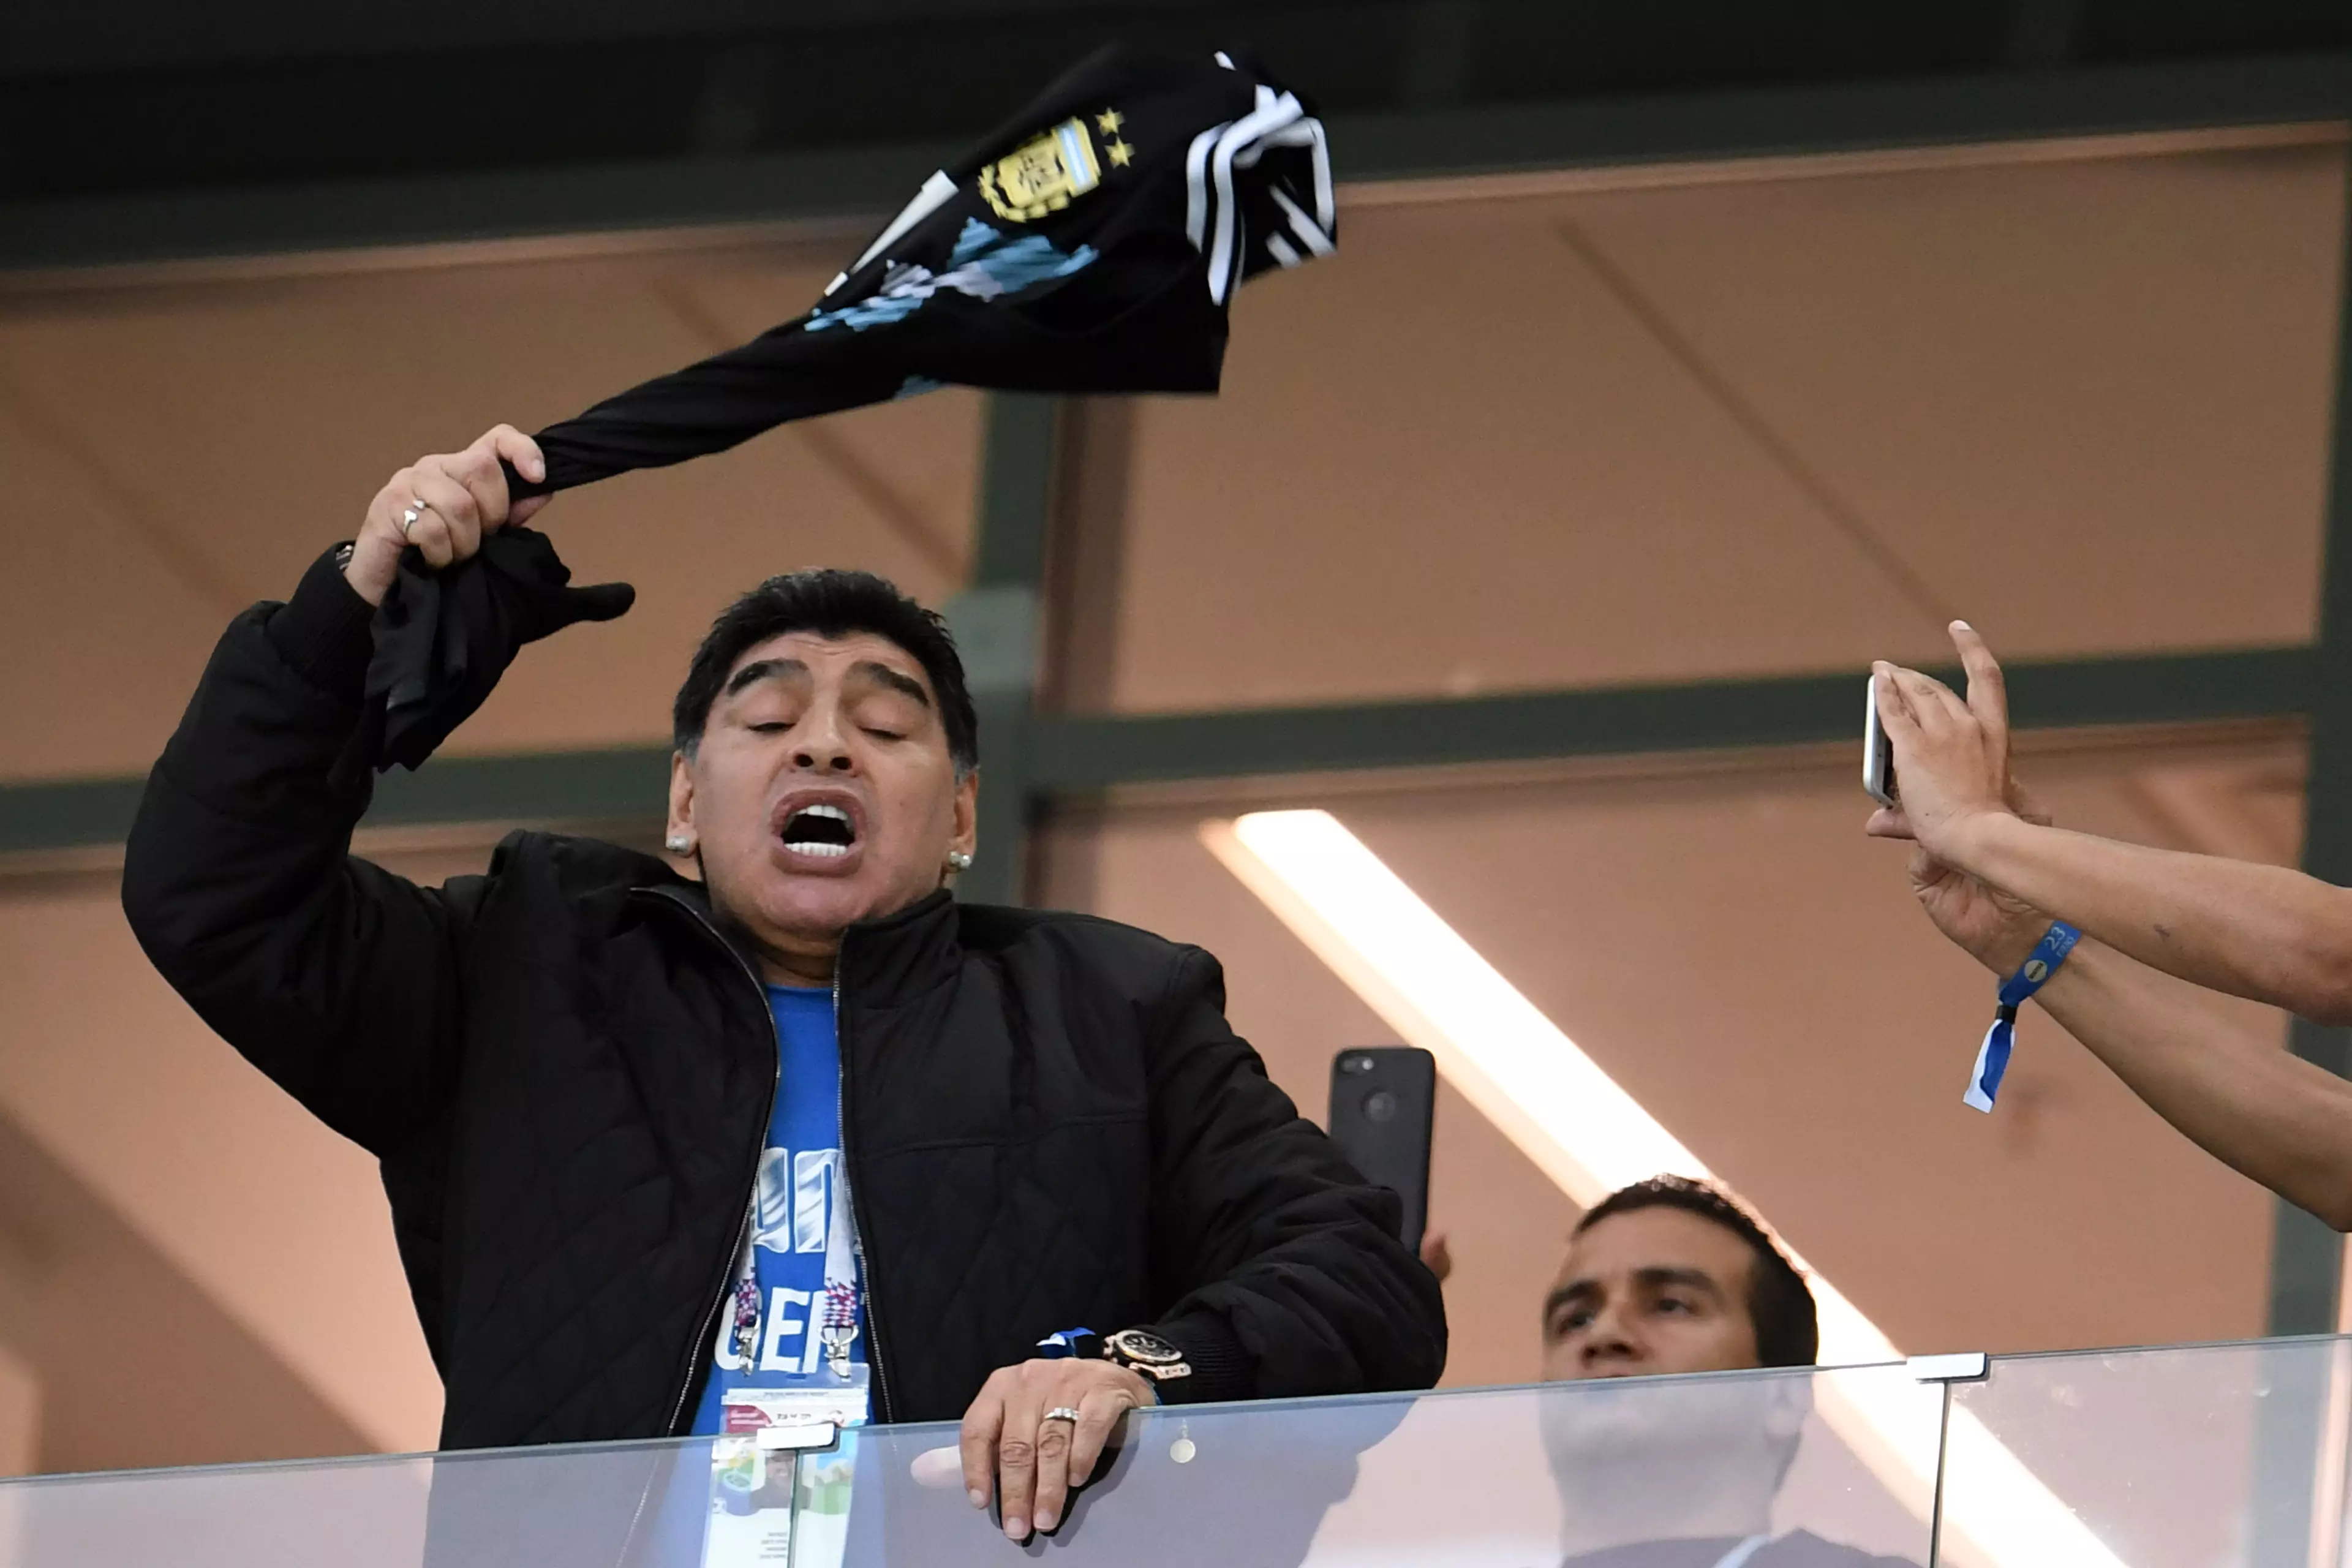 Maradona cheers on Argentina at the 2018 World Cup. Image: PA Images